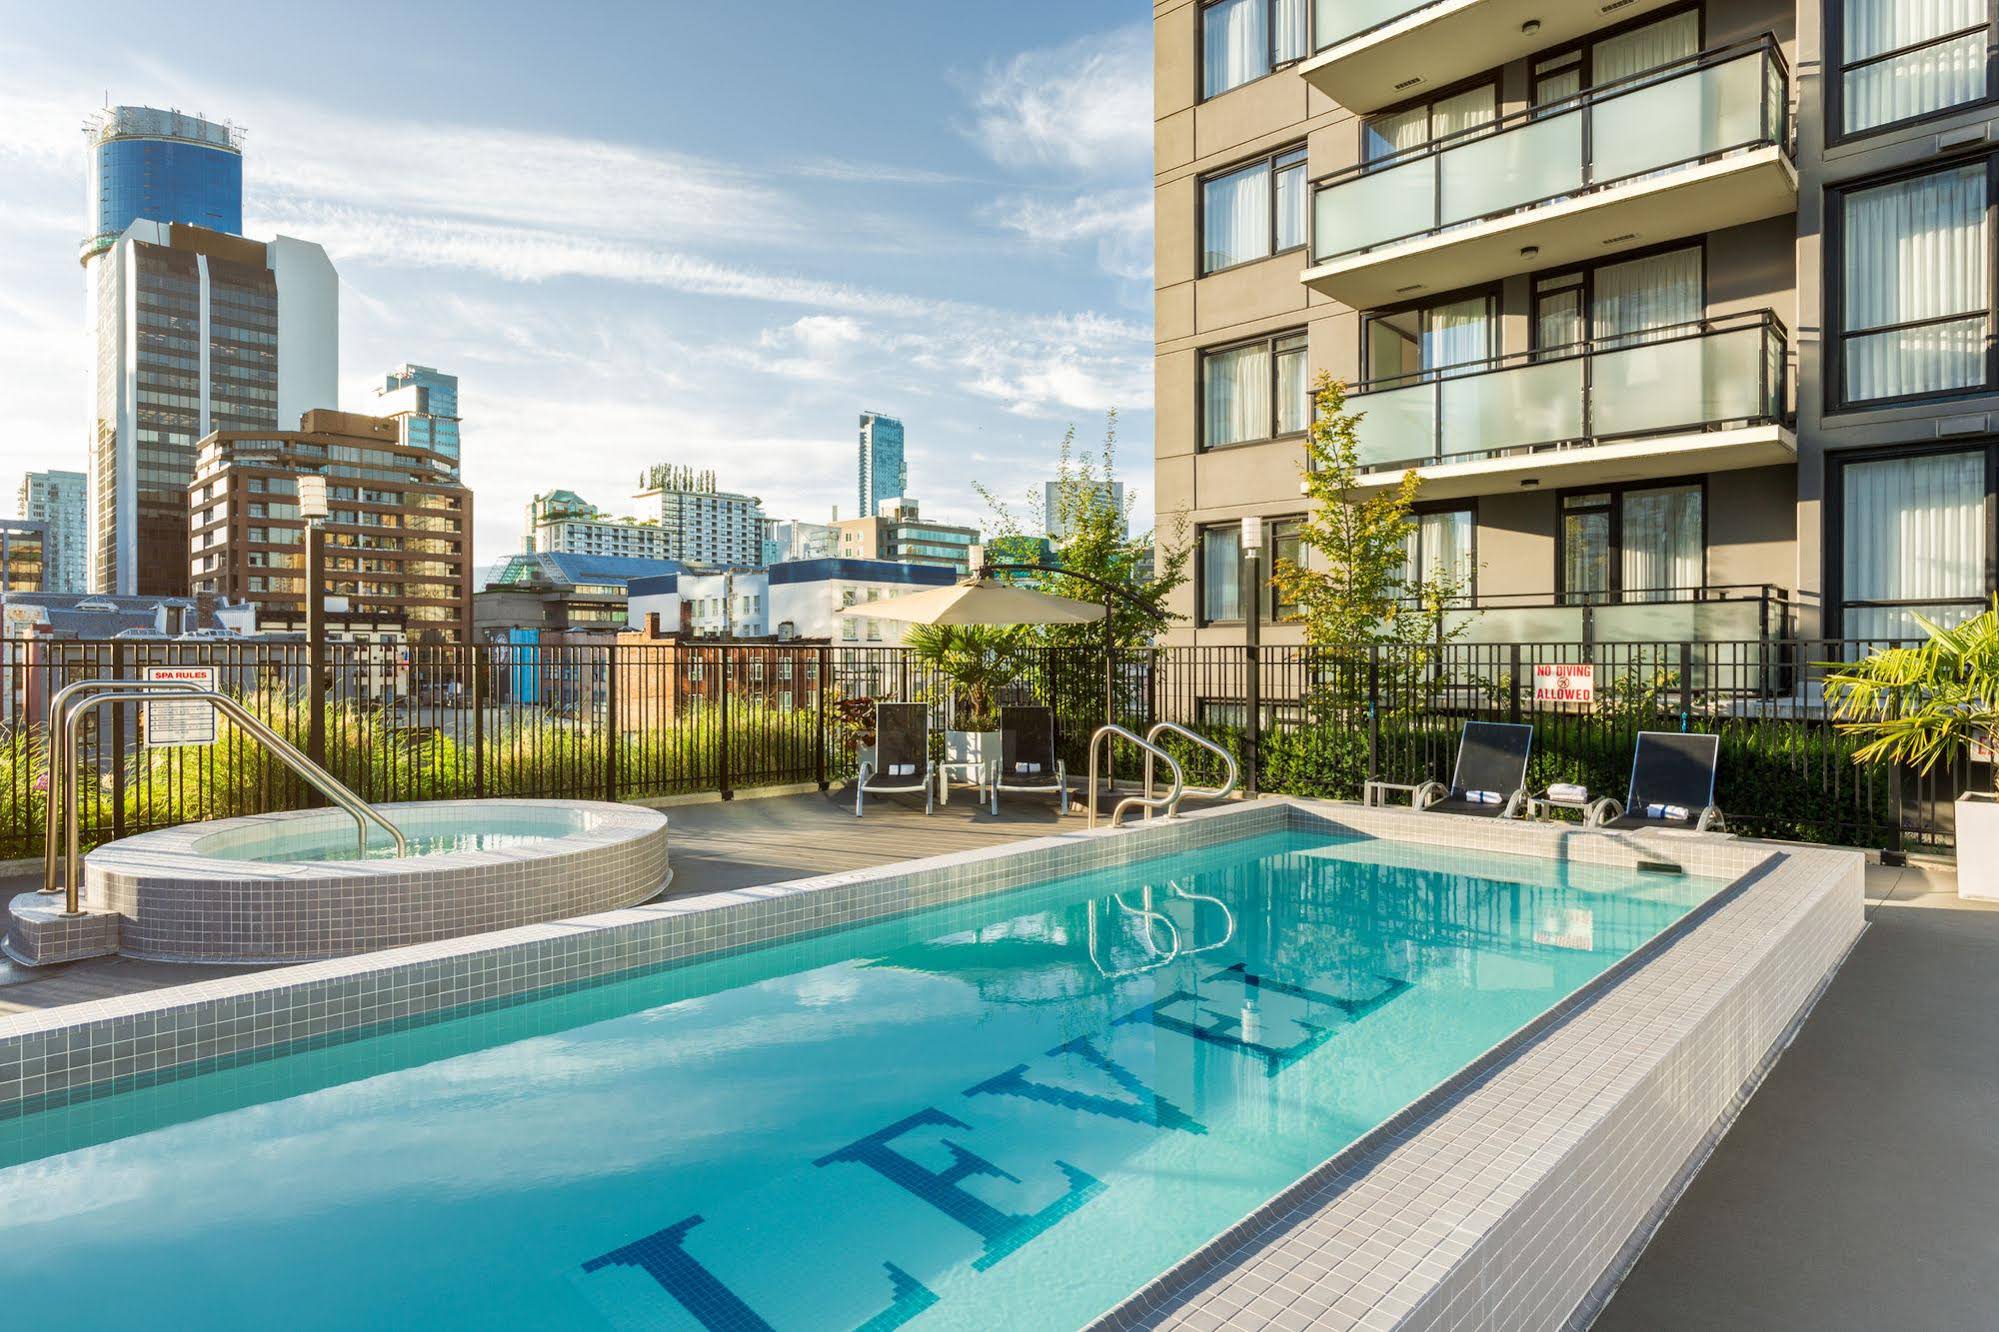 Level Hotels & Furnished Suites - Yaletown - Seymour